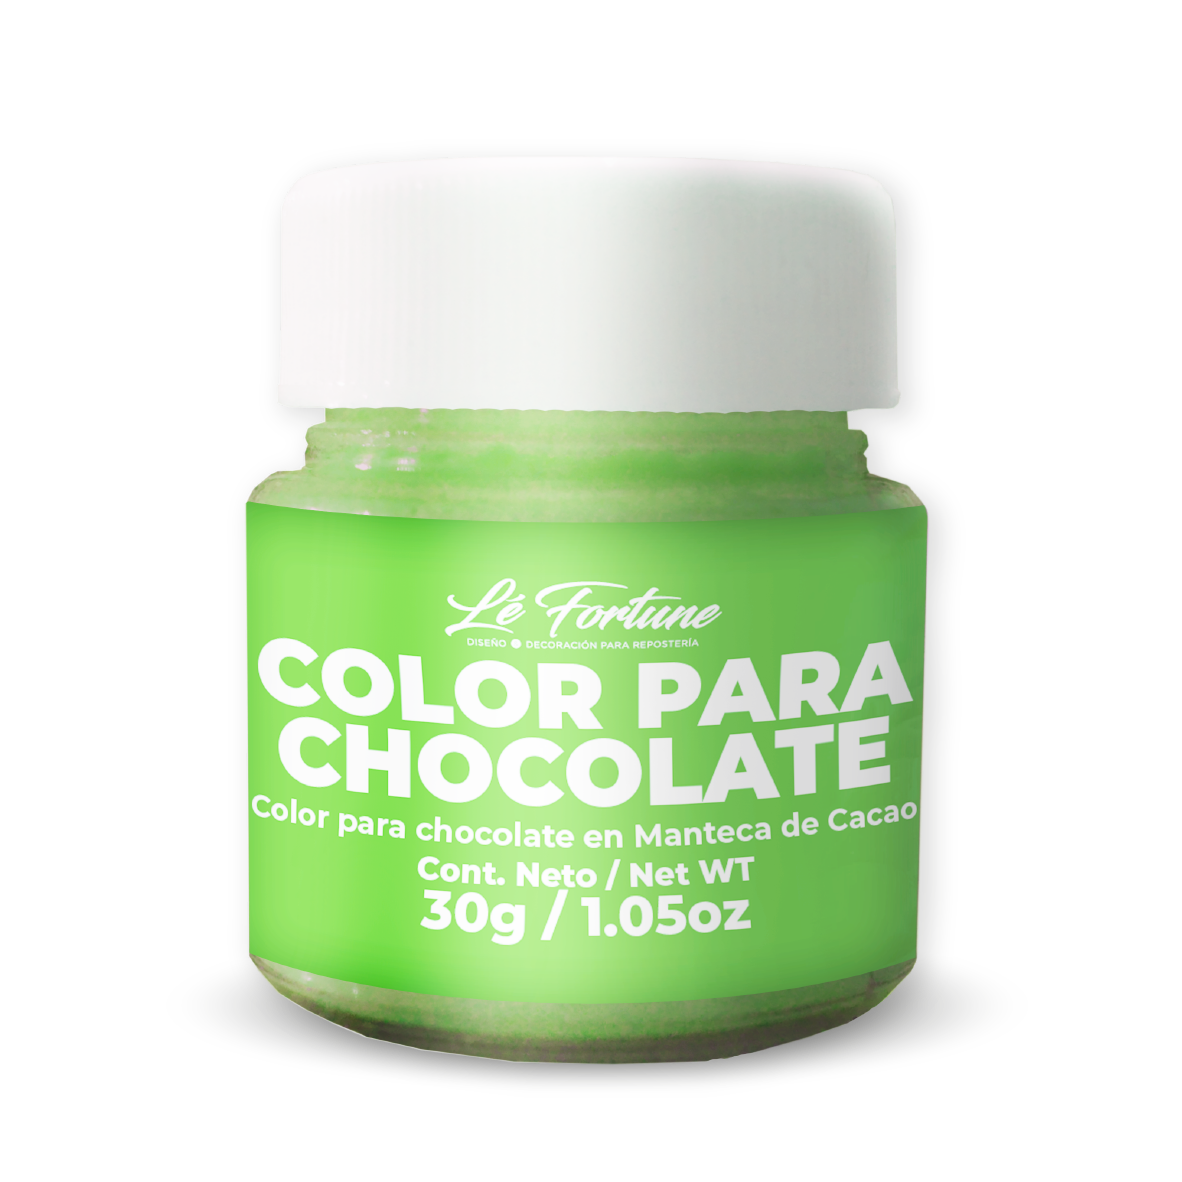 Color para Chocolate Verde Hoja Mate - Lé Fortune Store